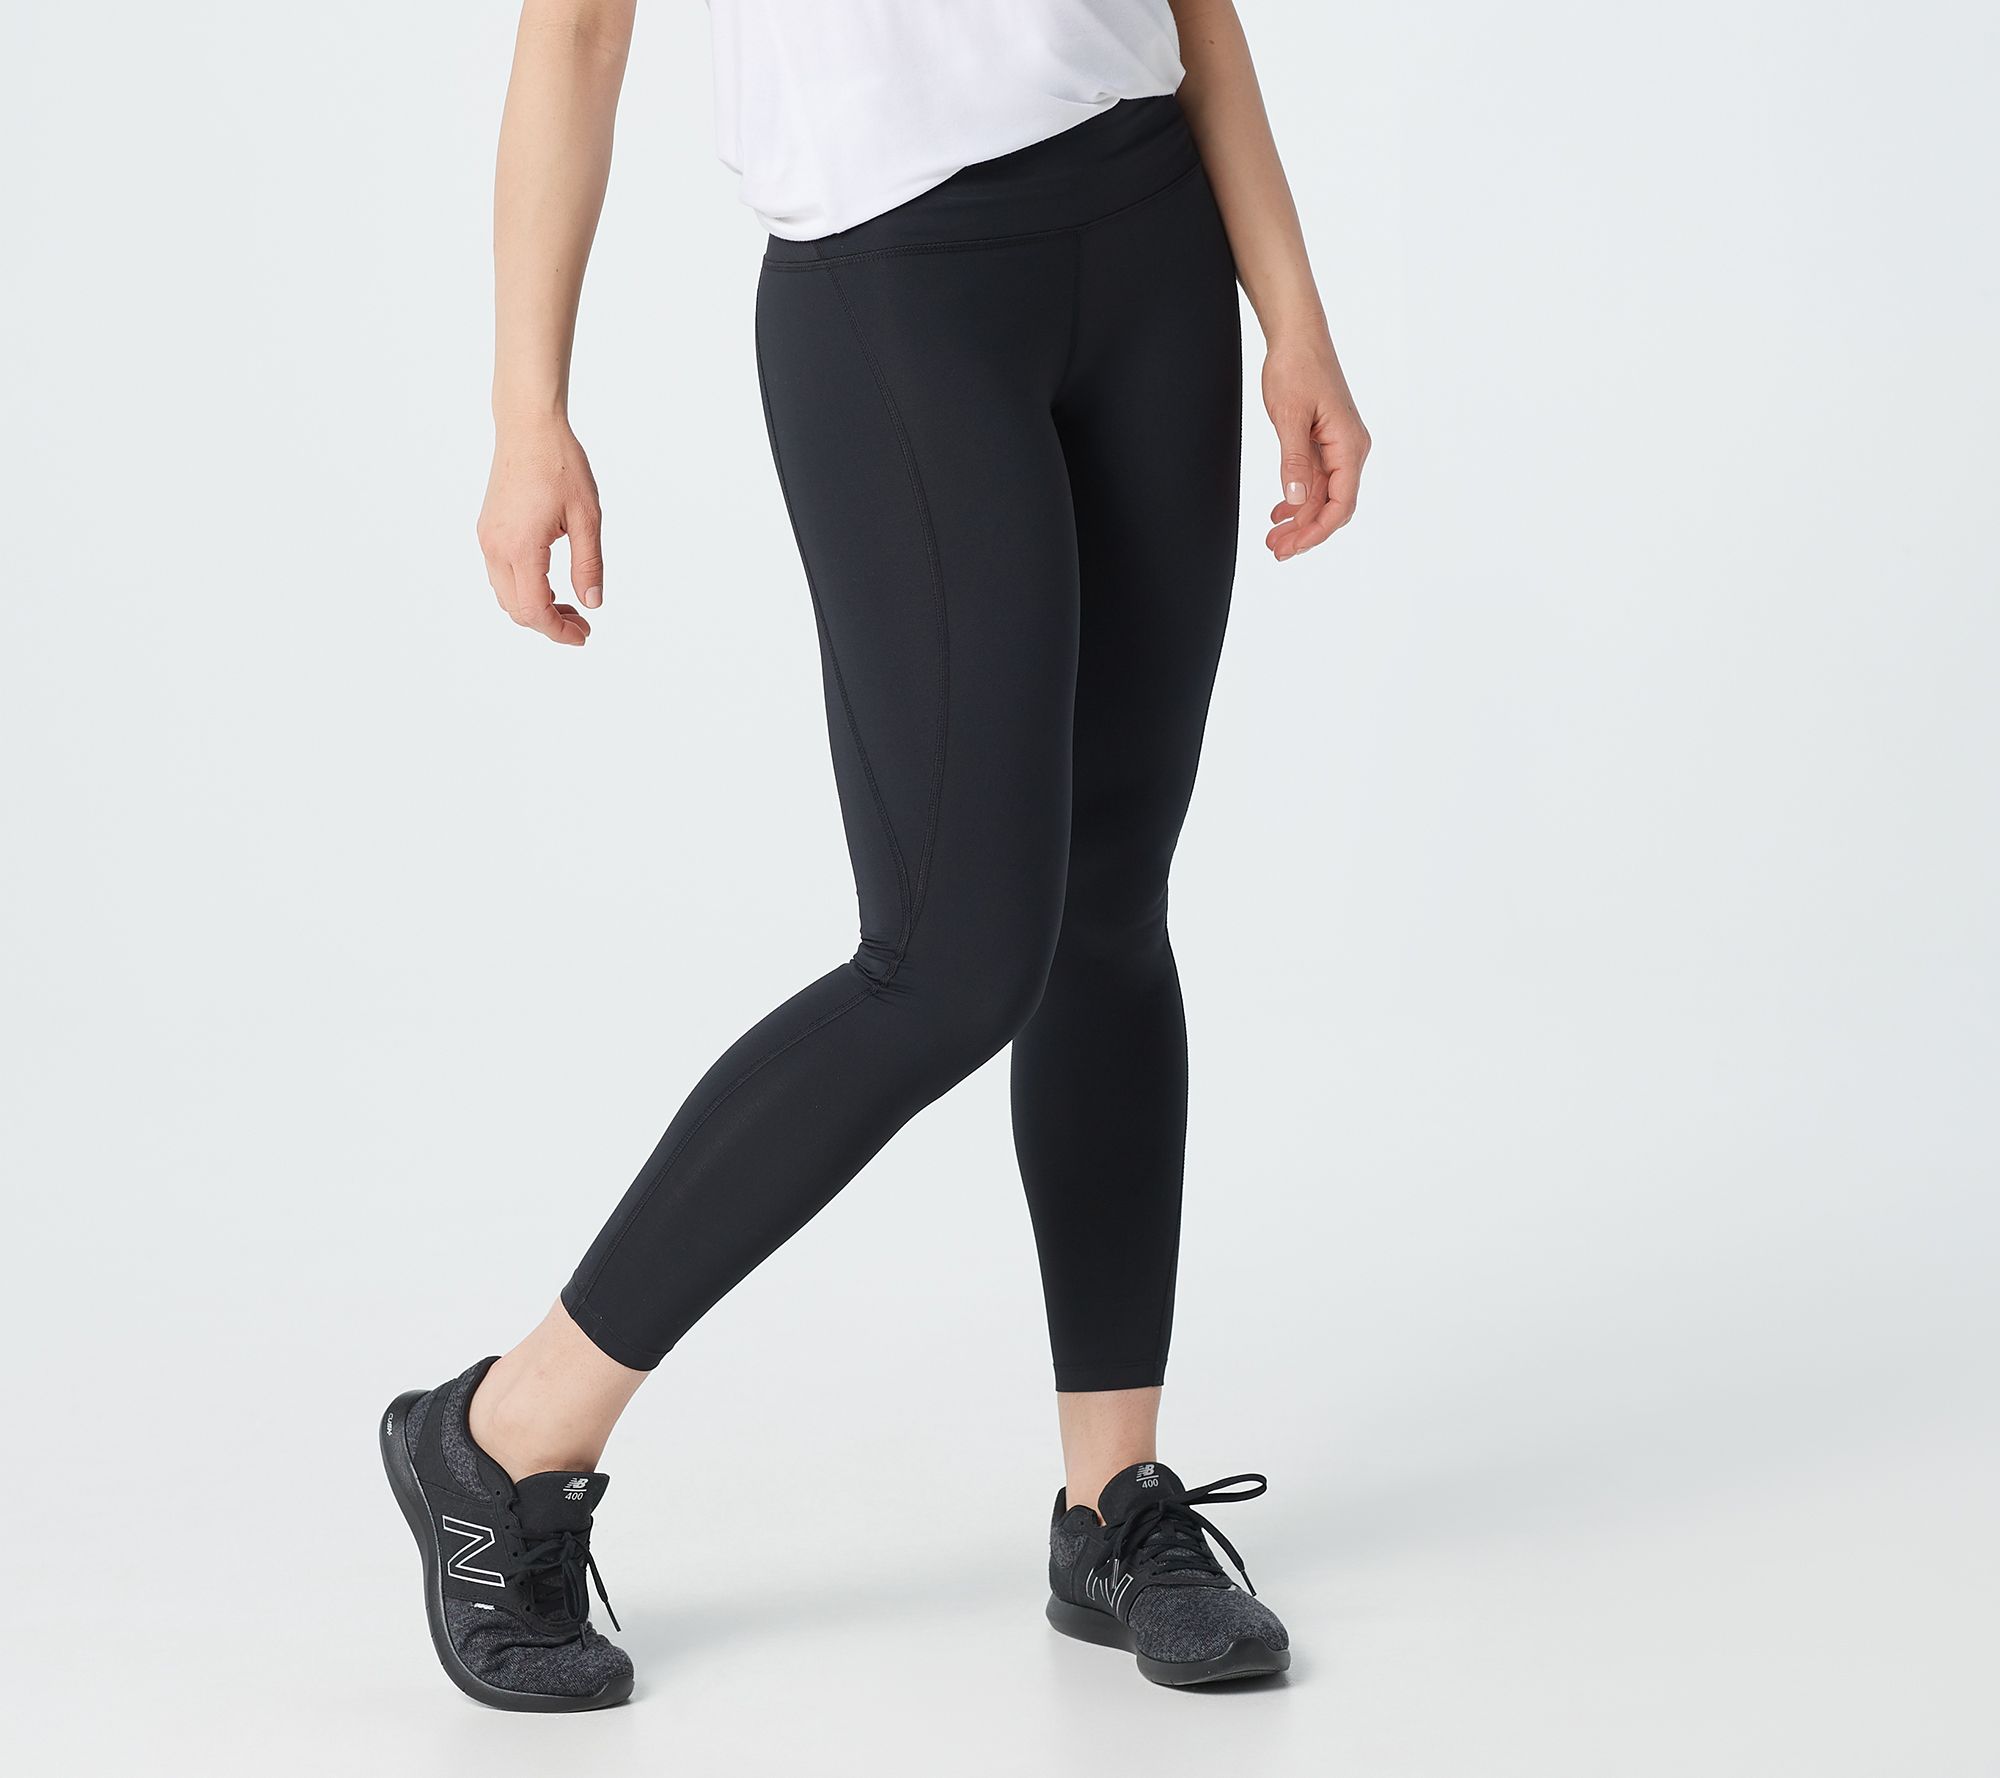 Tommie Copper Ultra-Fit Back Support Ankle Length Leggings 